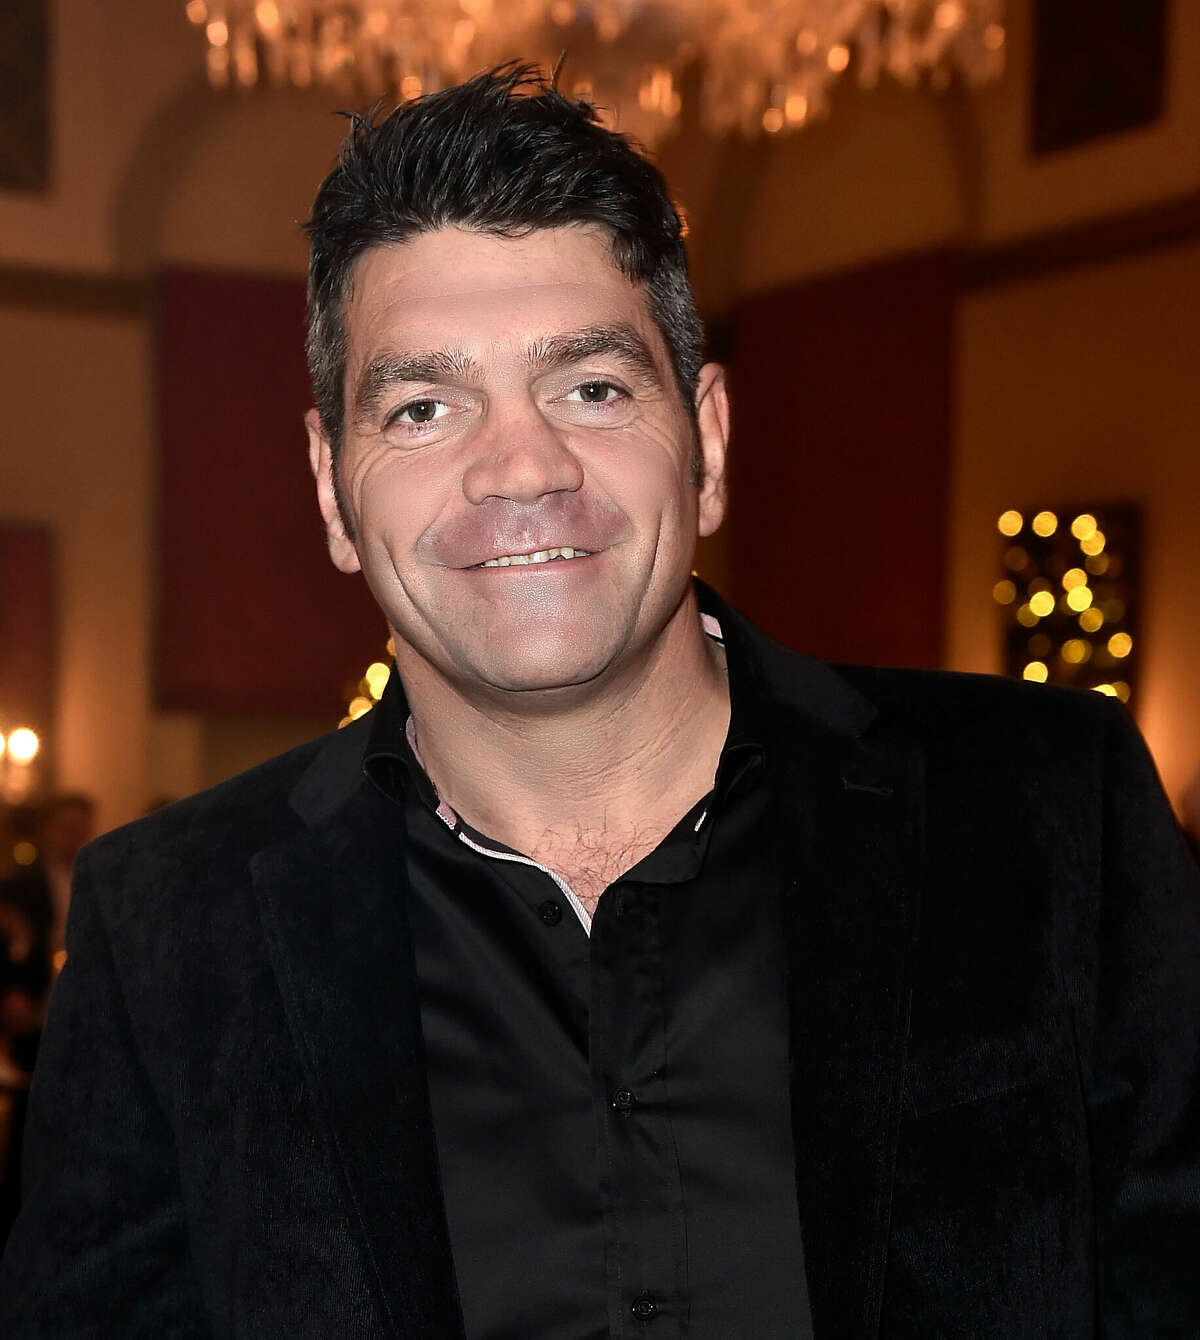 Spencer Wilding, who began his career as a kickboxer, has appeared in such massive franchises as the "Star Wars" and the Harry Potter series and "Doctor Who."